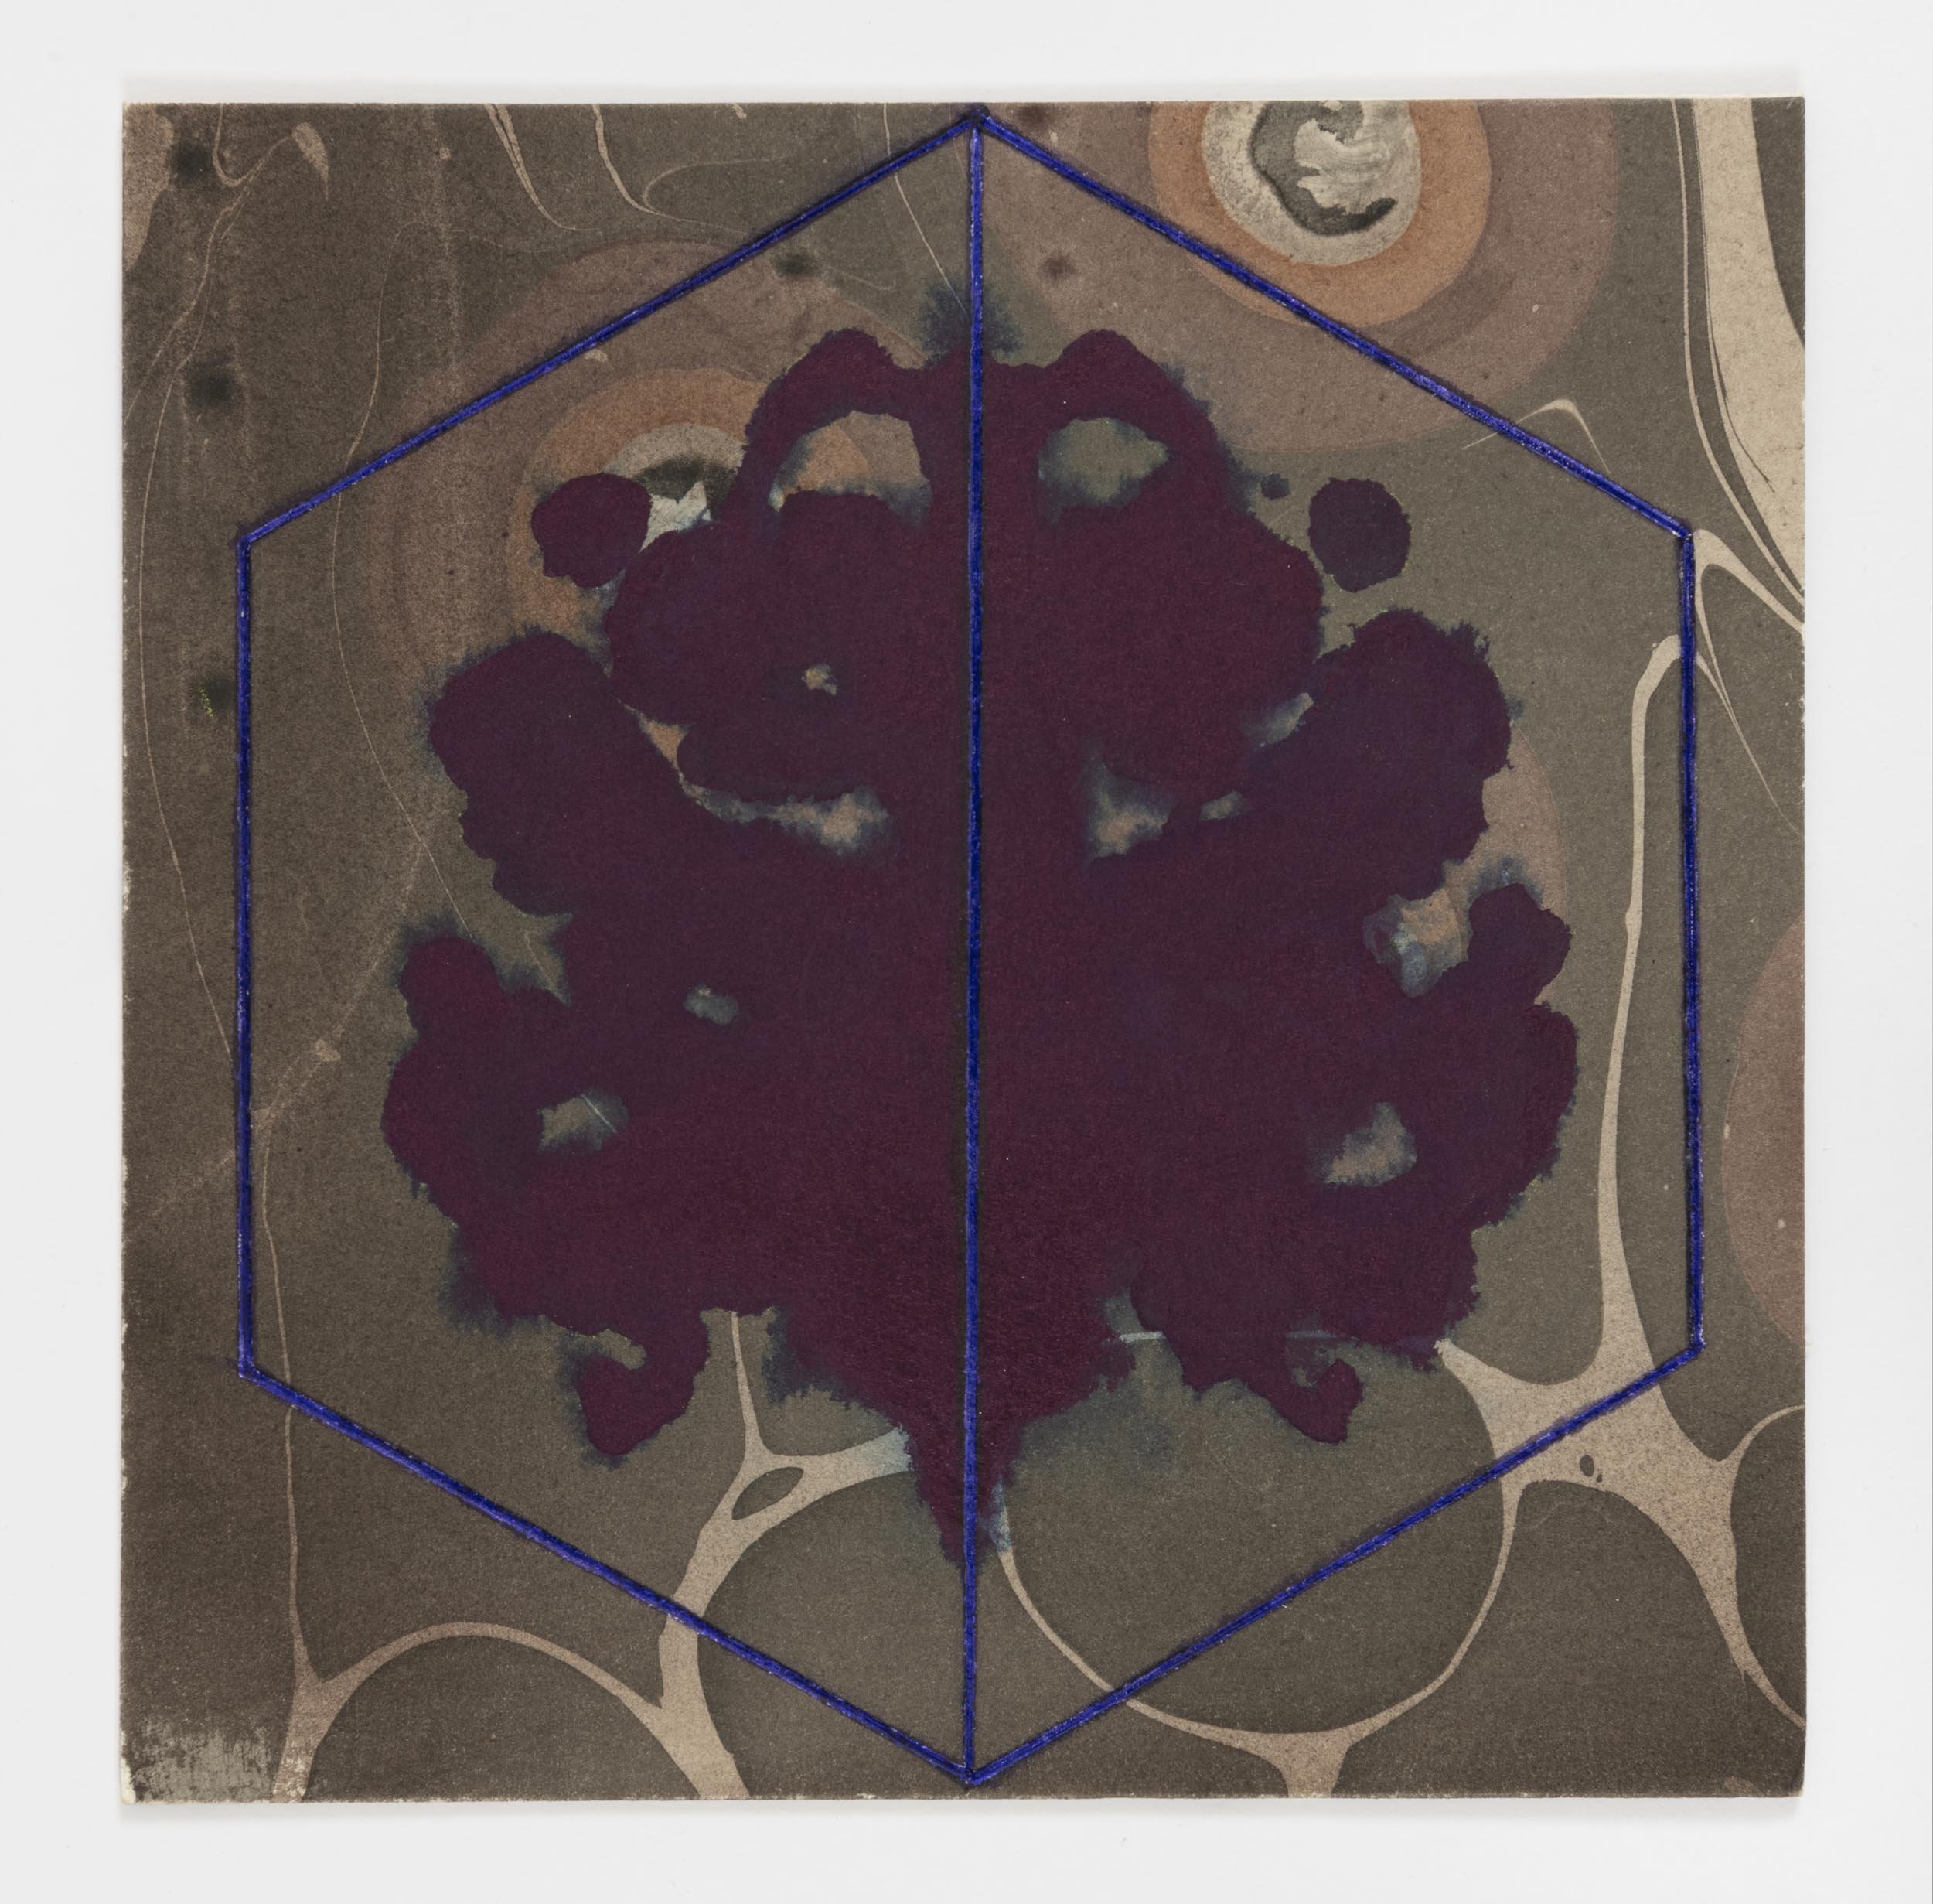  Rorschach 2, 2021 gouache with toned aluminum leaf on paper 7 x 7 in. &nbsp; 17.78 x 17.78 cm. 